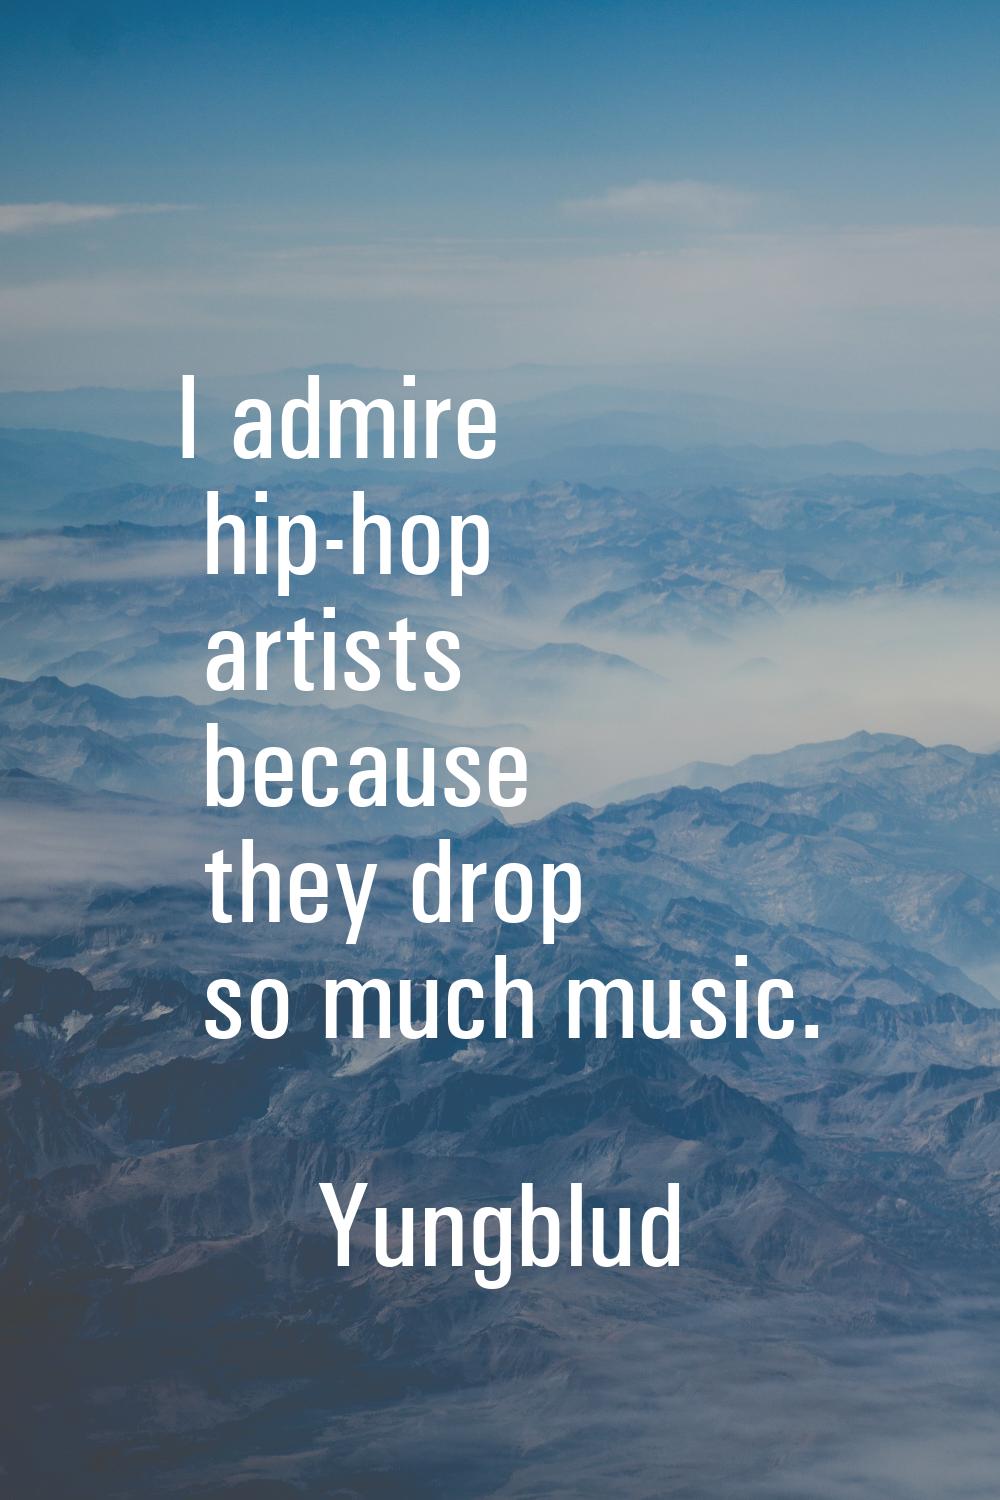 I admire hip-hop artists because they drop so much music.